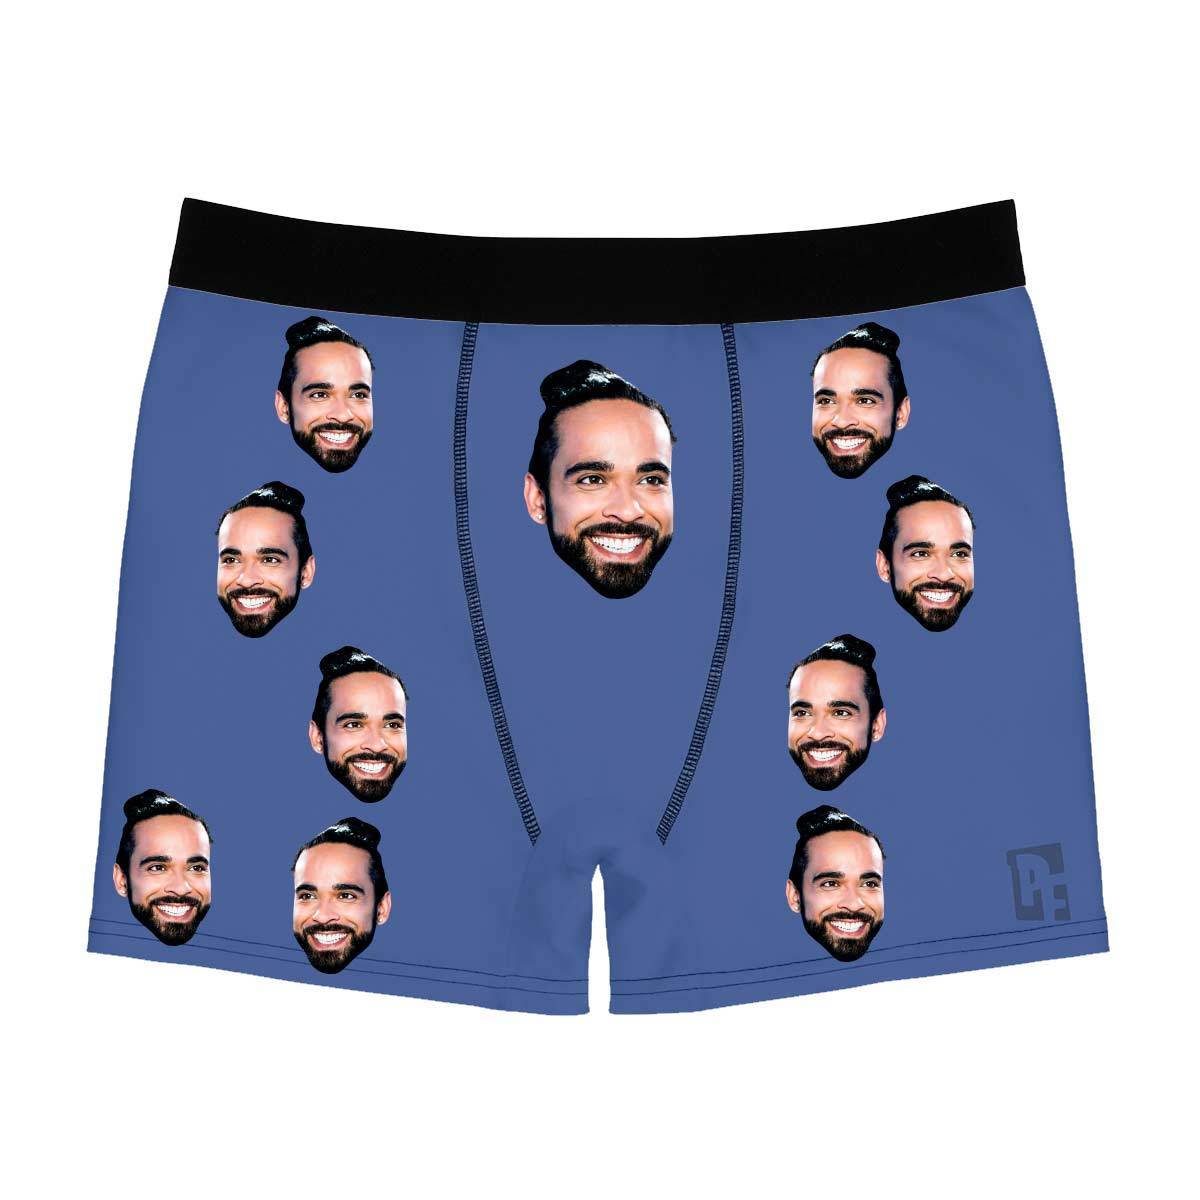 Darkblue Blank Design men's boxer briefs personalized with photo printed on them